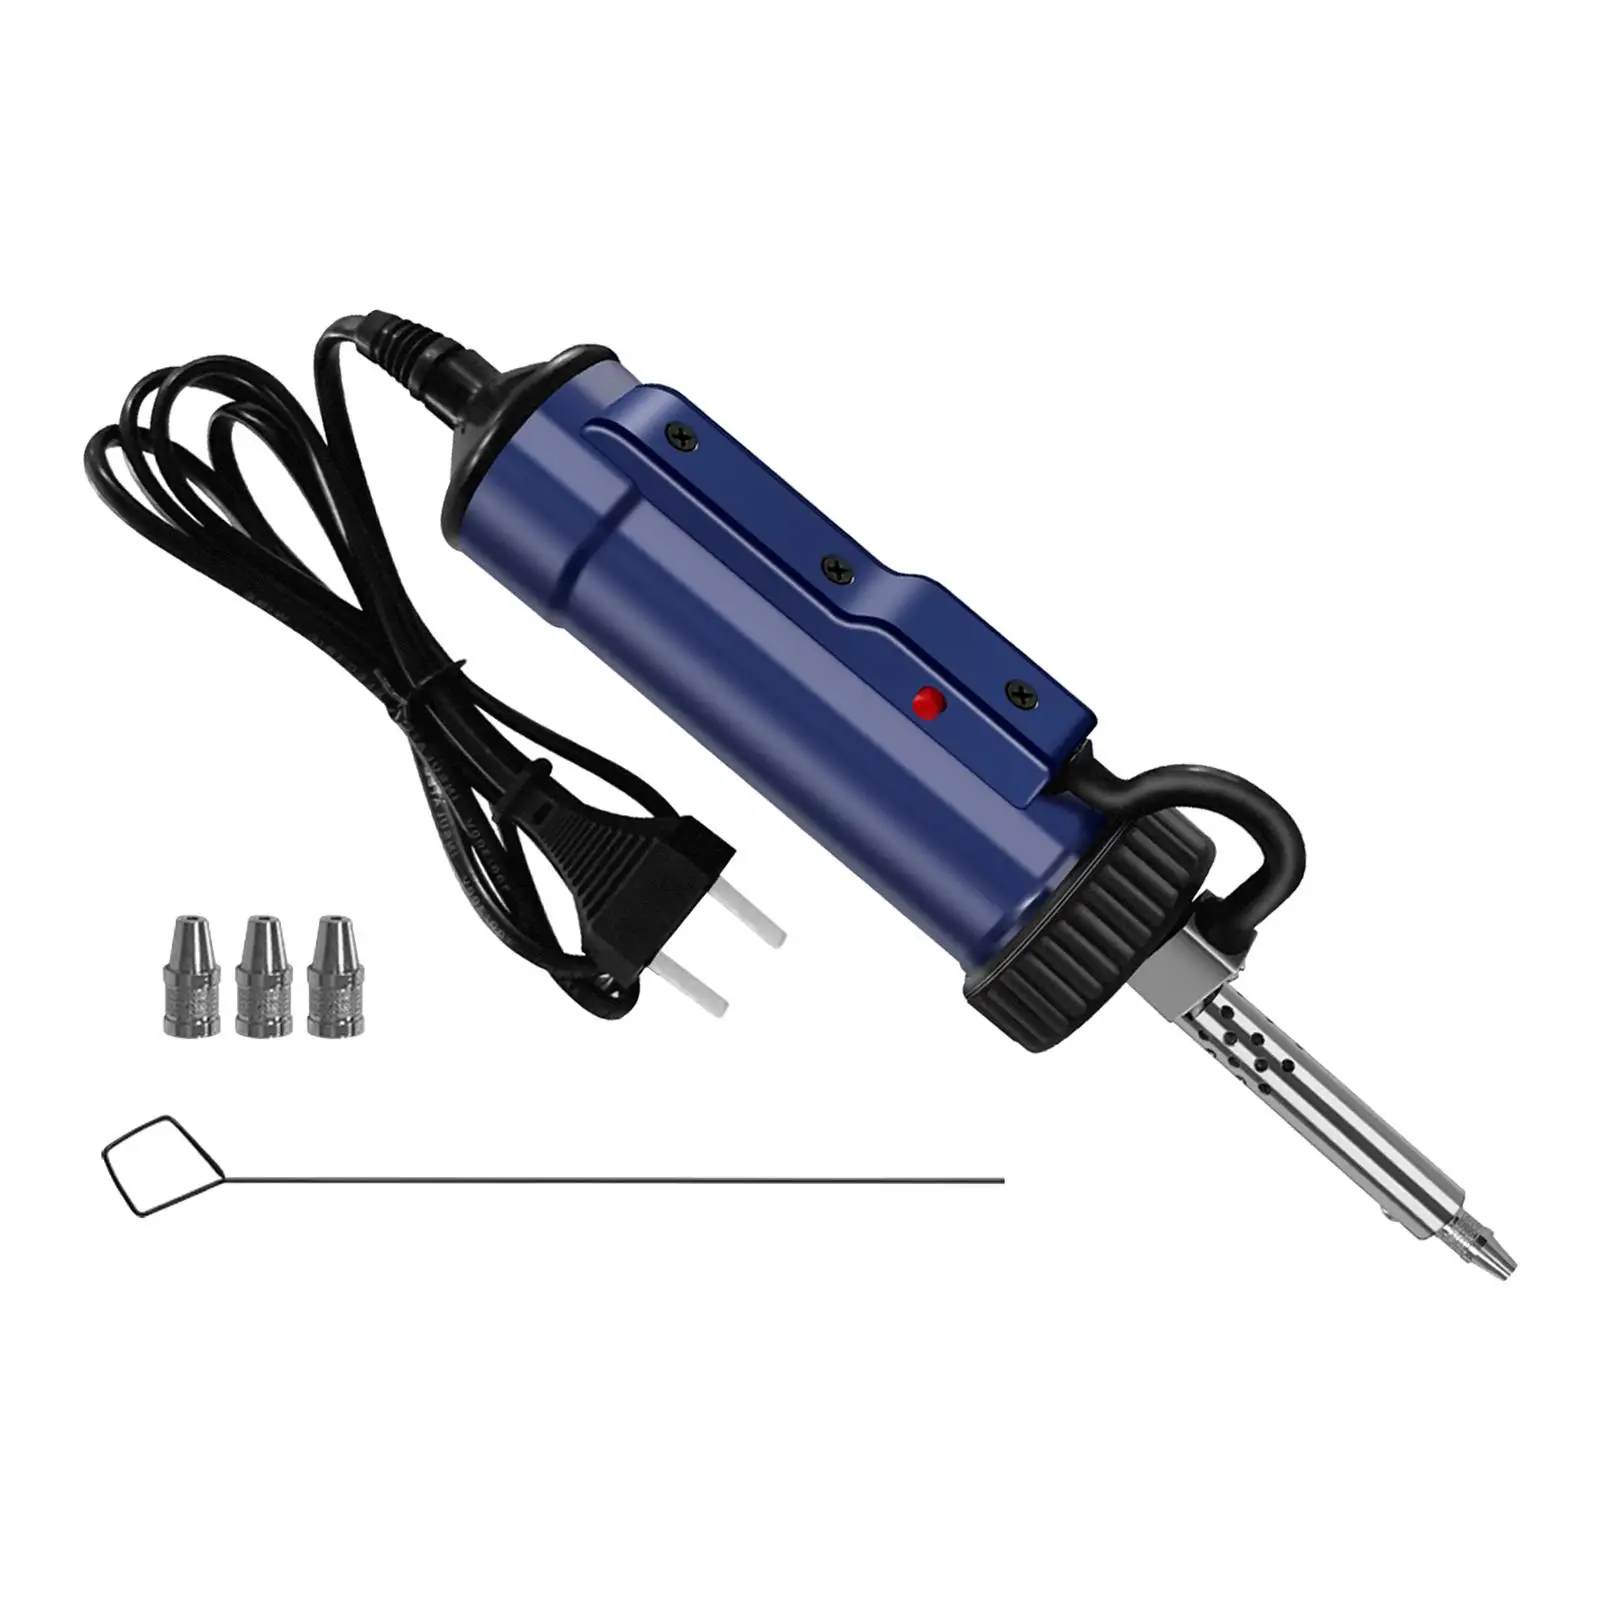 Electric Solder Tin suckers 30W Electric DIY Welding Soldering Automatic Handheld Solder Iron Kits for Home DIY Hobby Industry